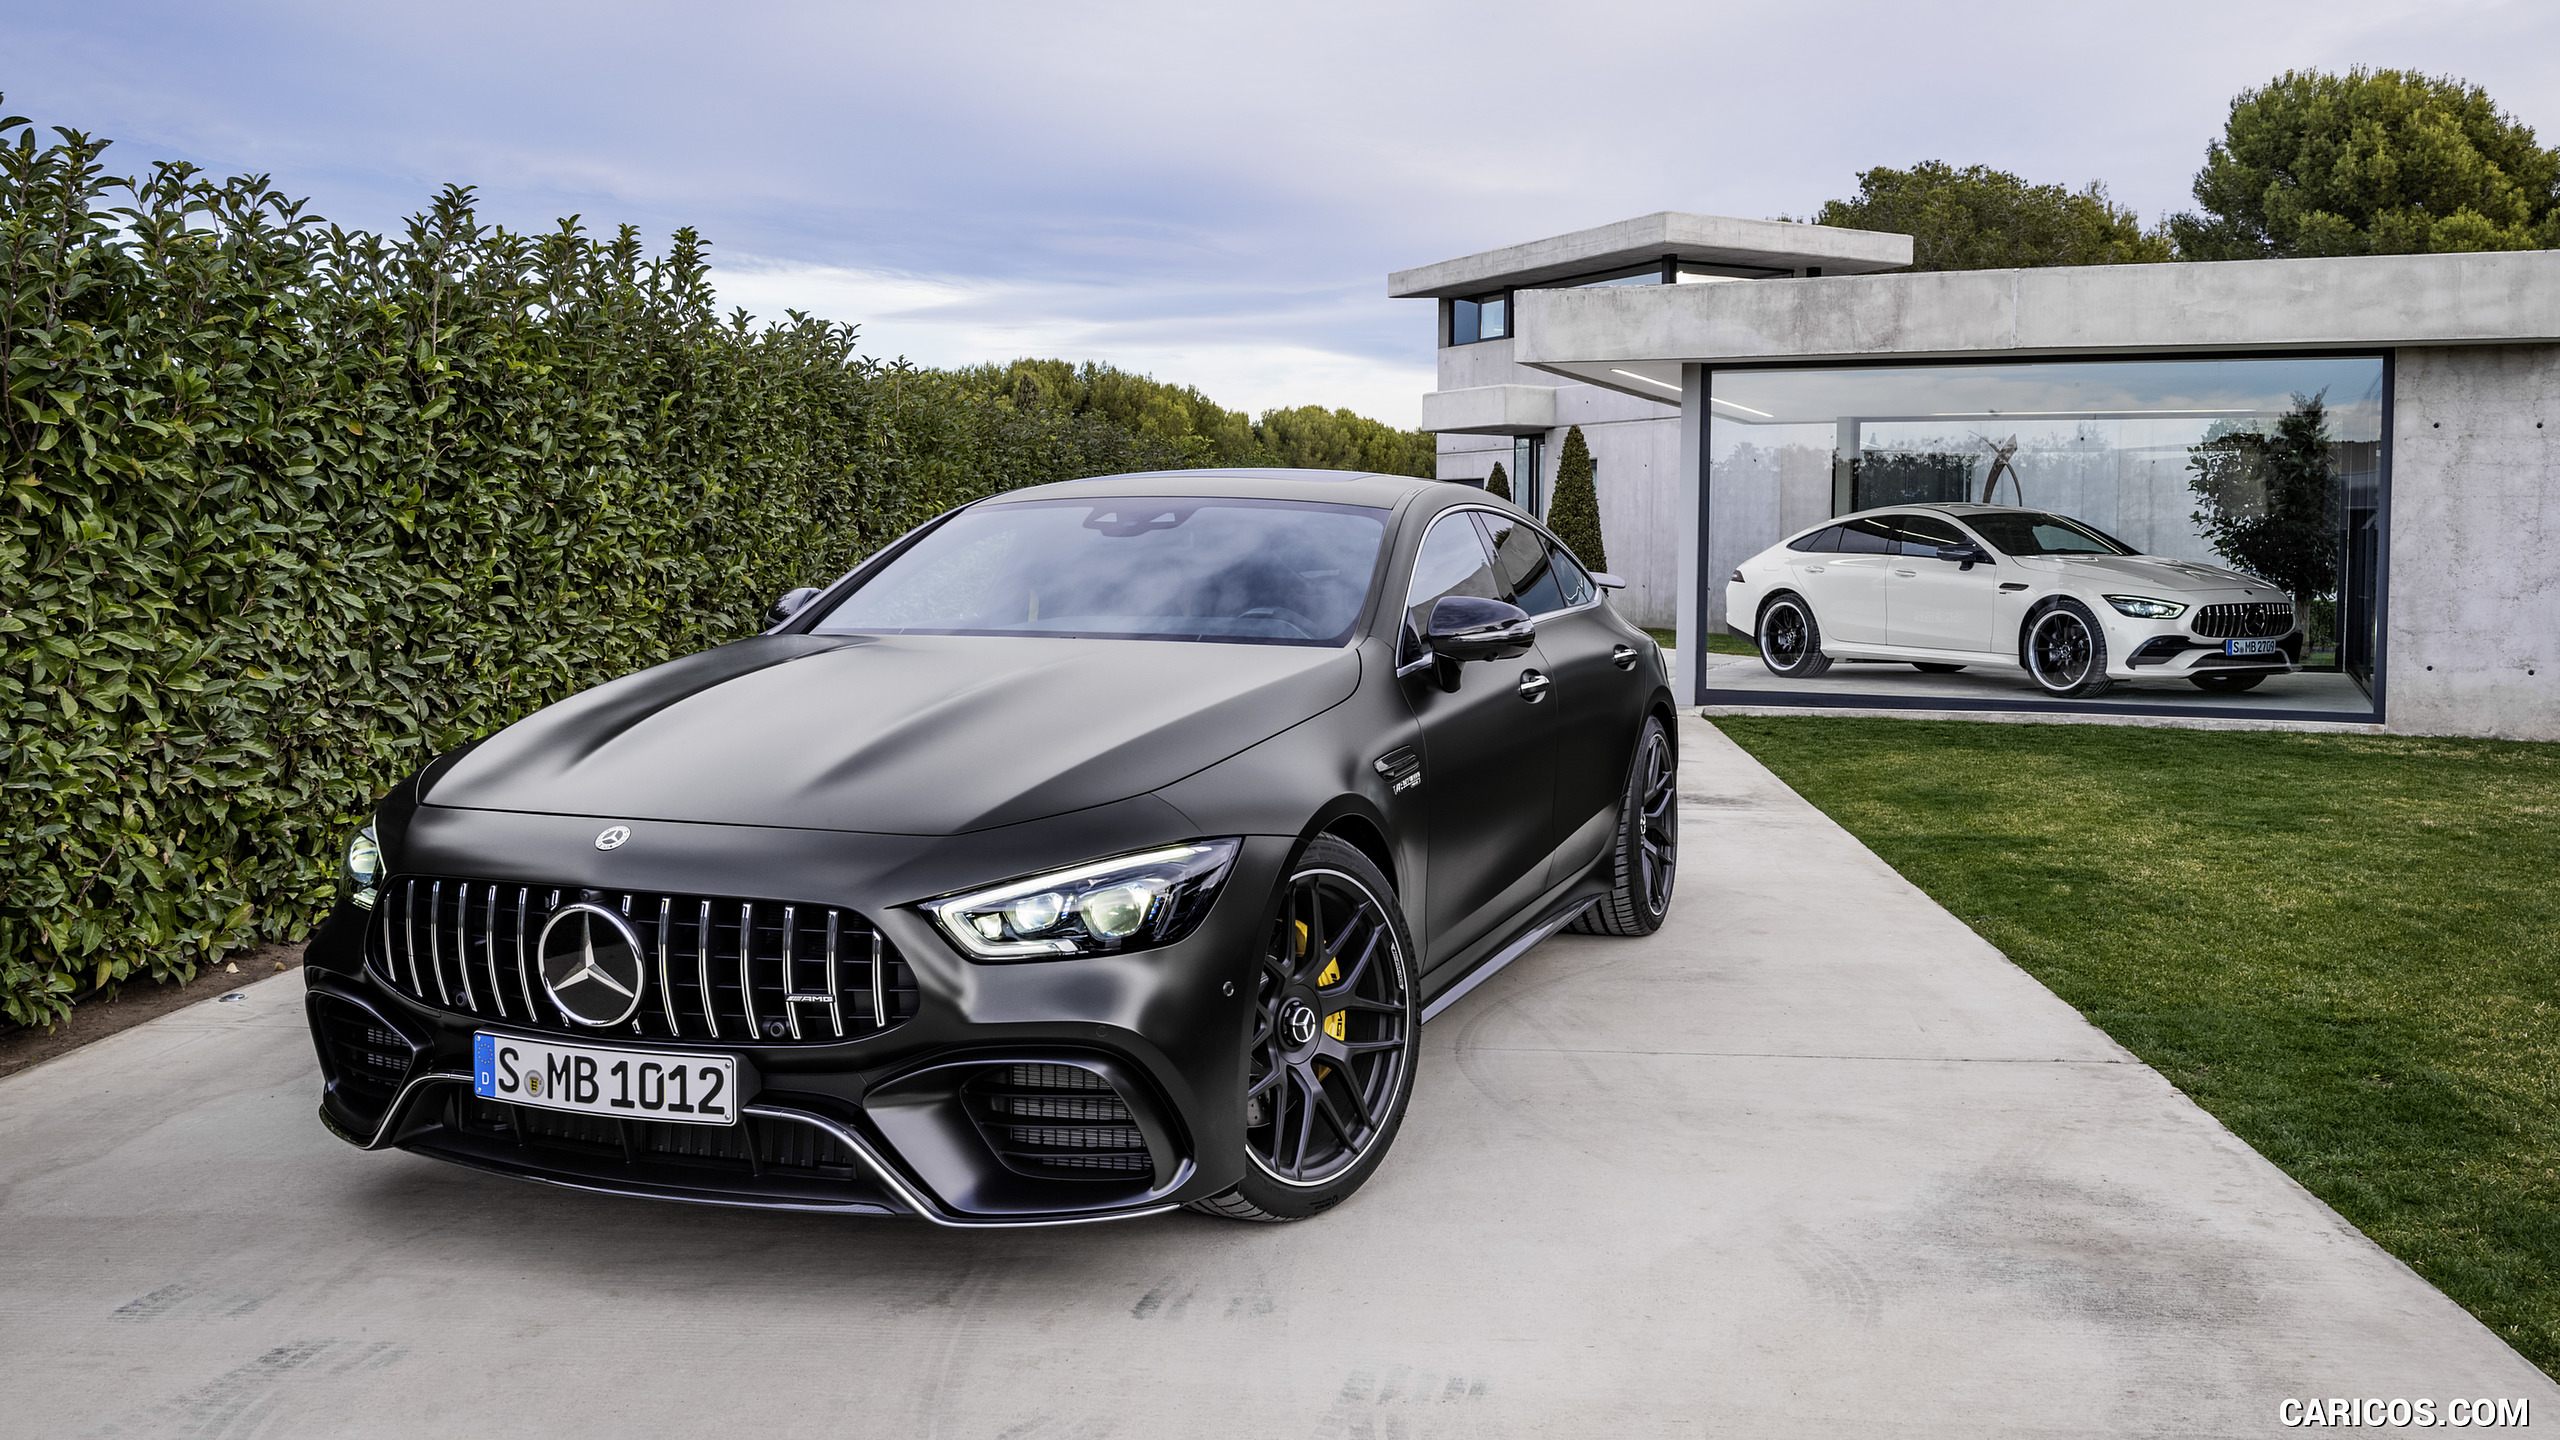 2019 Mercedes-AMG GT 63 and 53 4MATIC+ 4-Door Coupe, #43 of 427